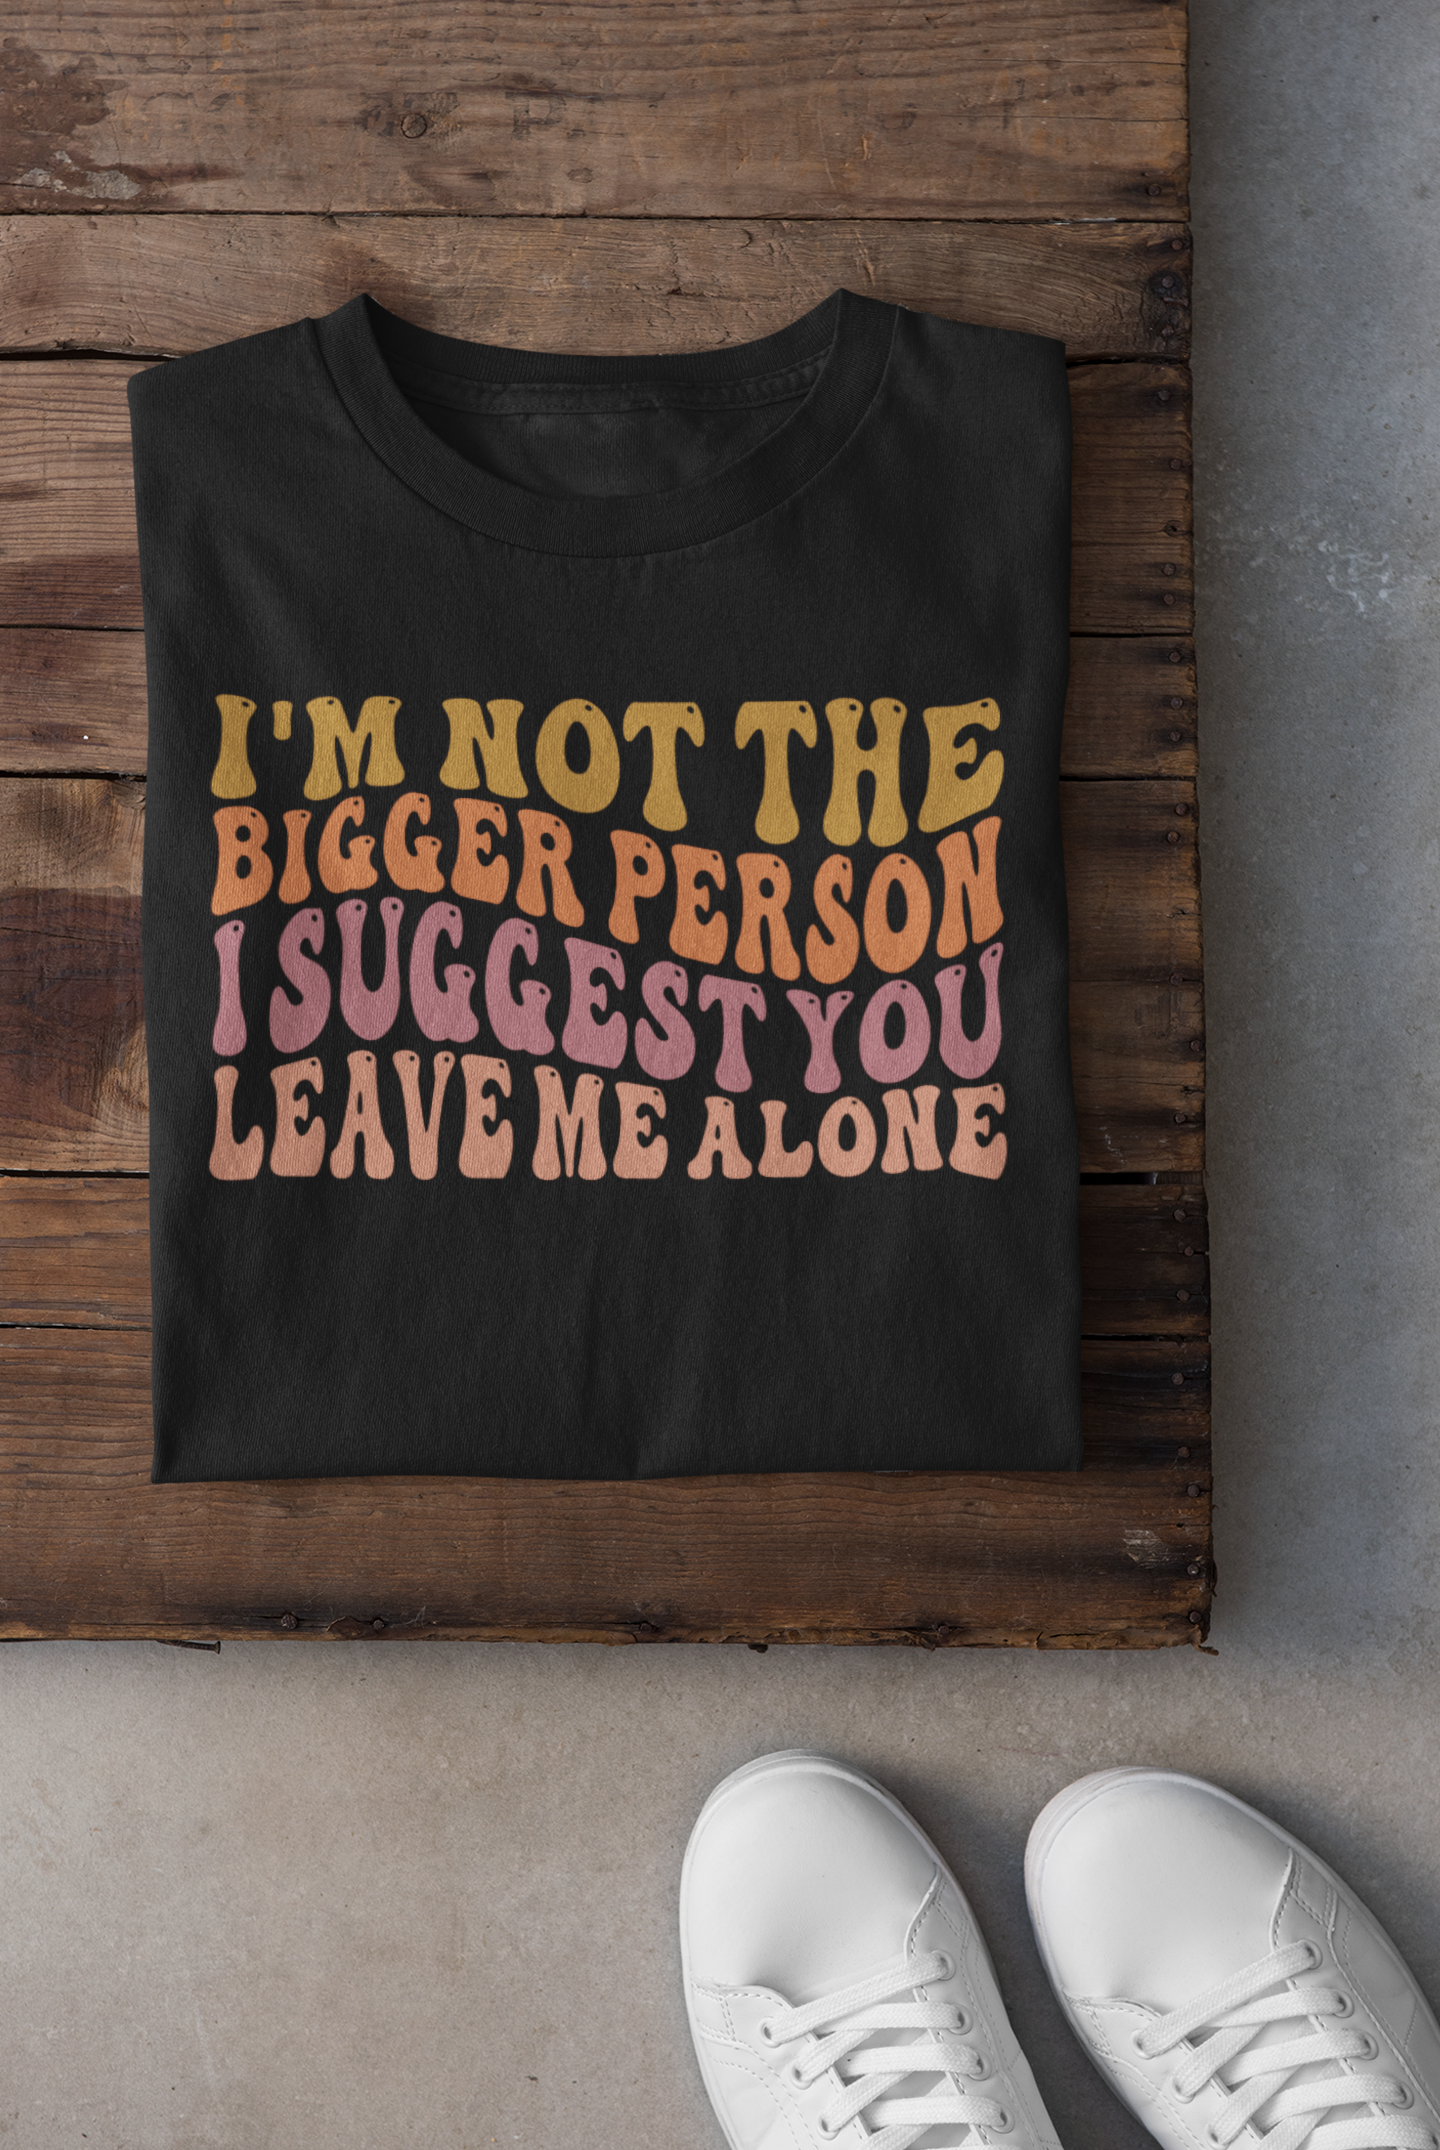 I'm not the Bigger person I suggest you leave me alone.   DTF PRINT